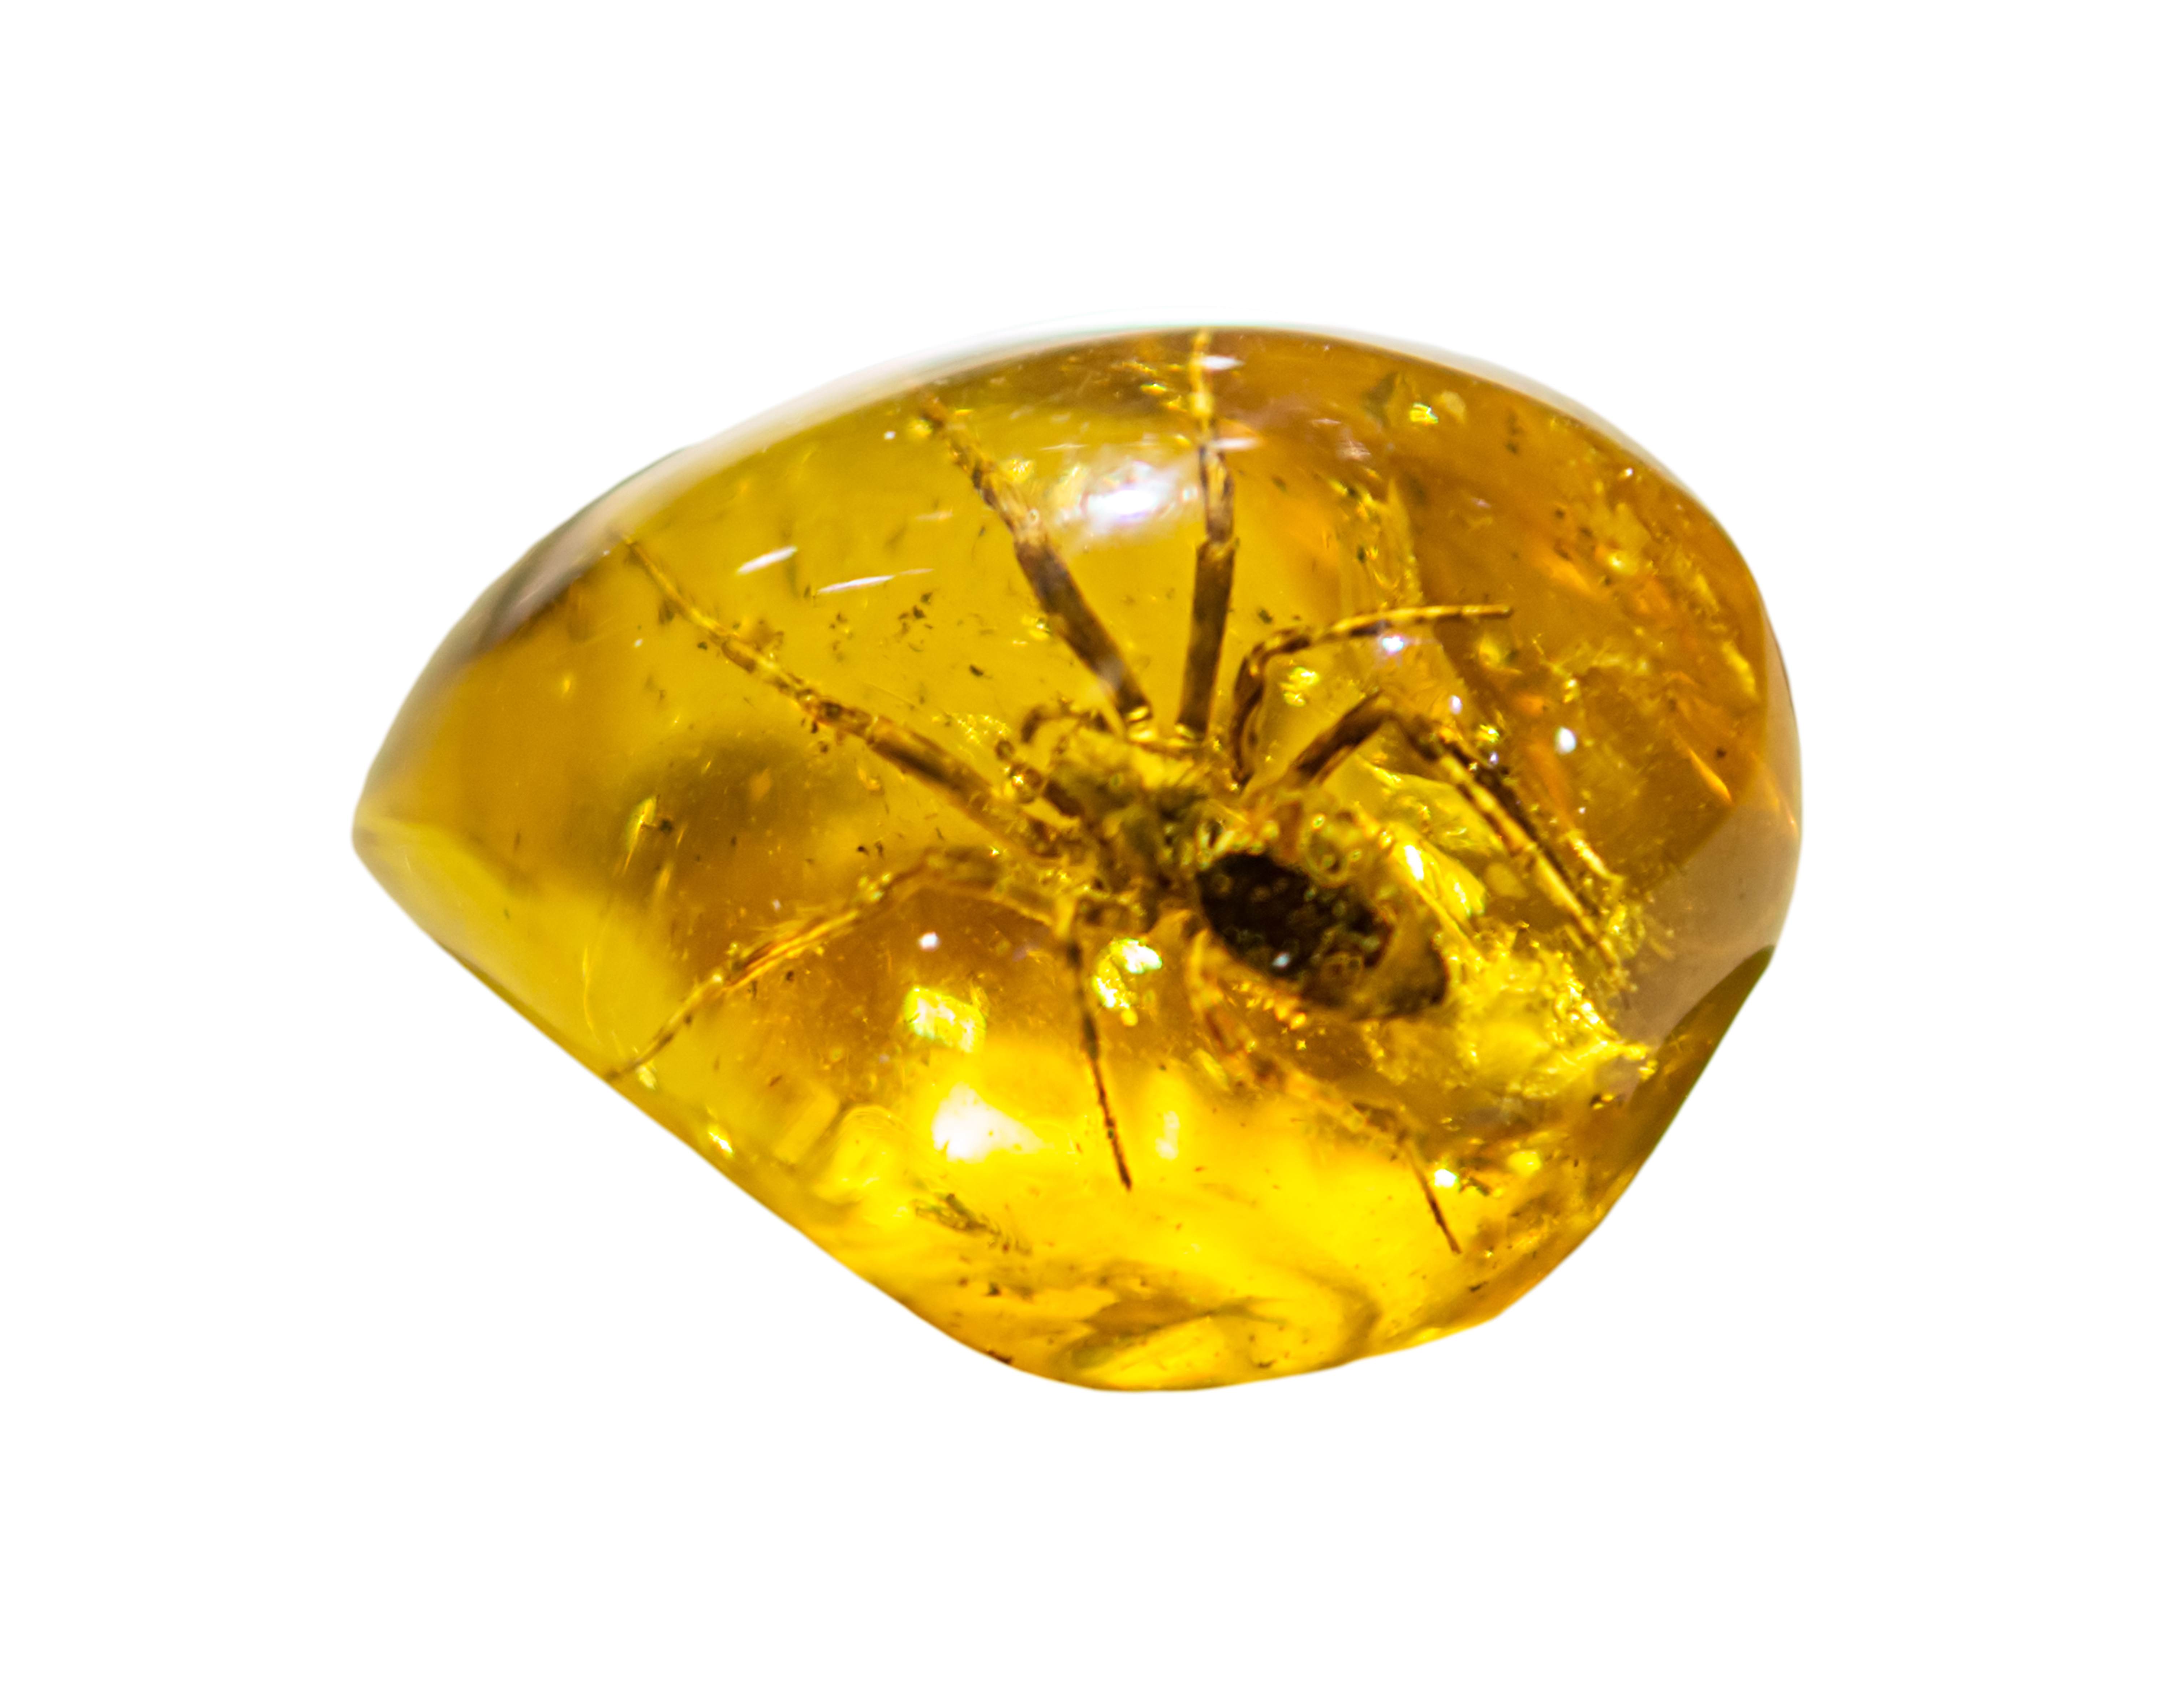 7 Amazing Facts About Amber Gemstone